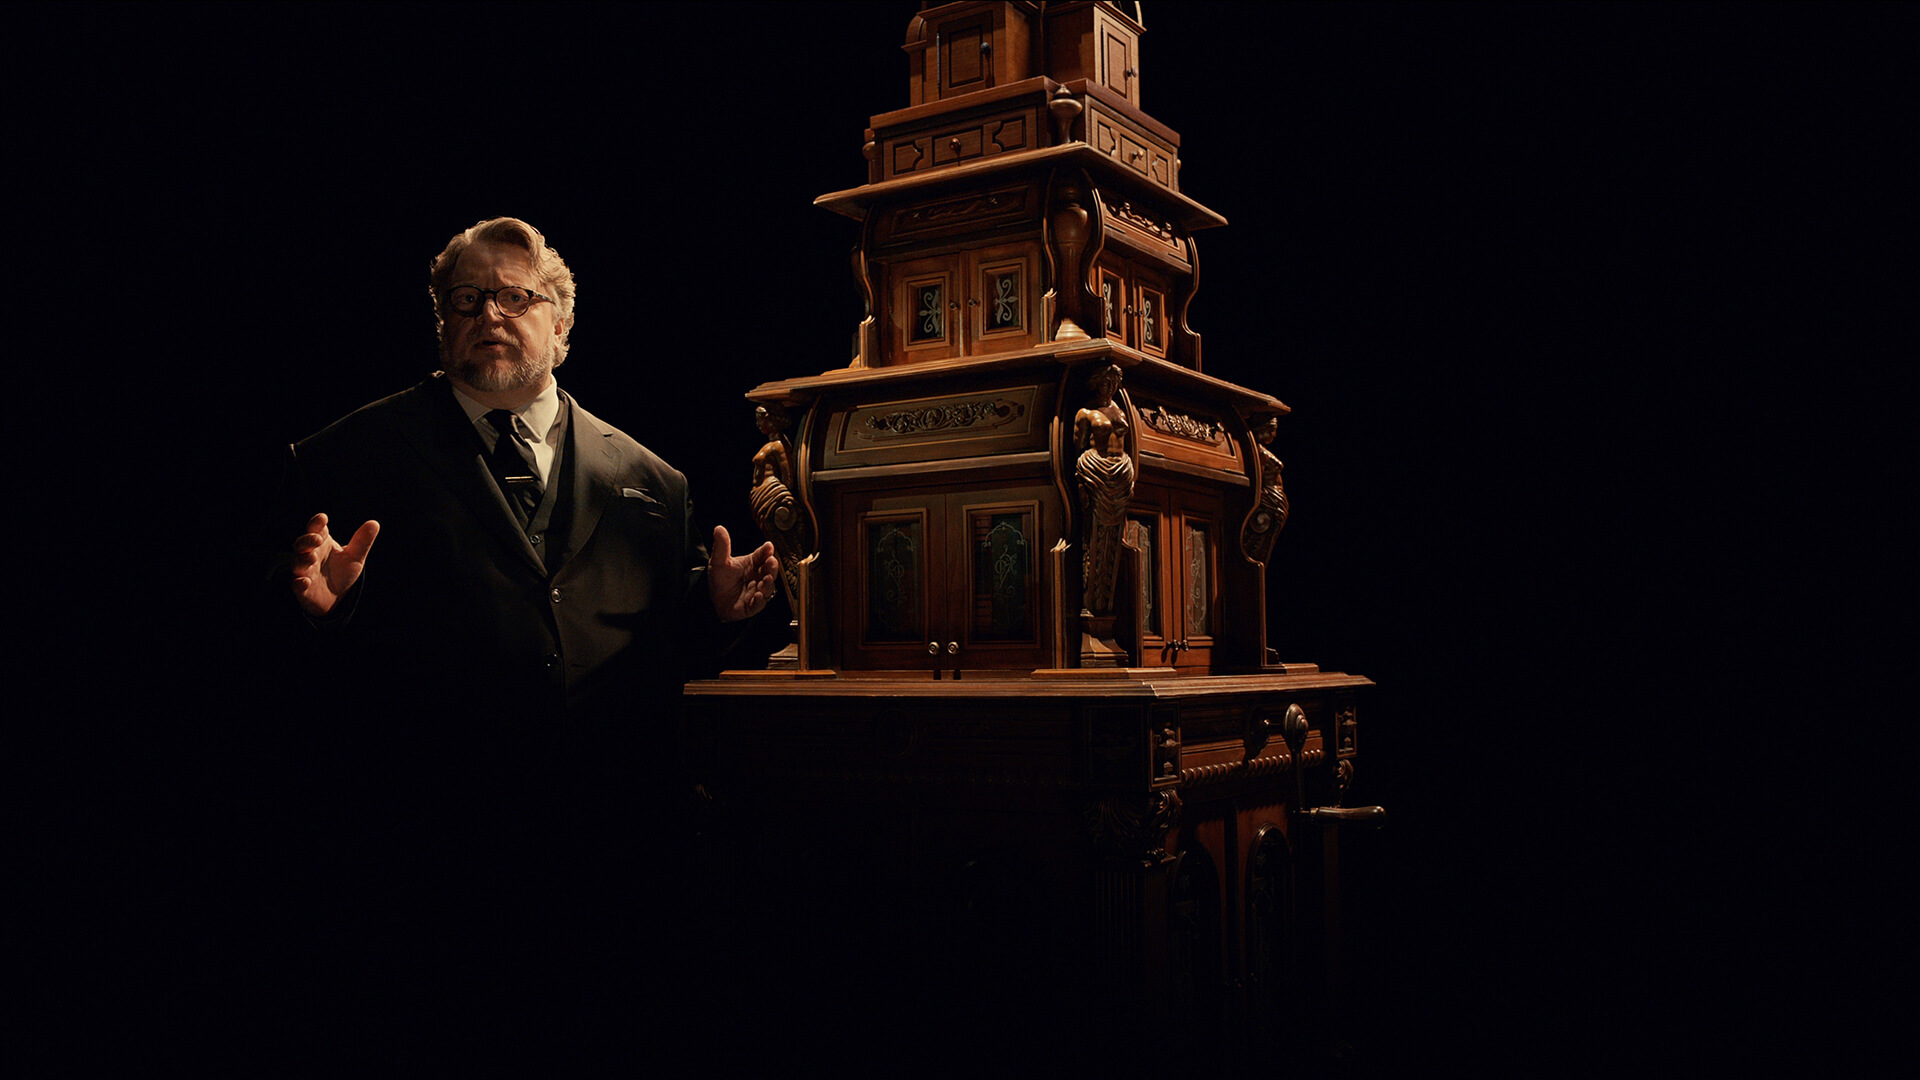 Production still from ‘Cabinet Of Curiosities’. Image: courtesy of Netflix